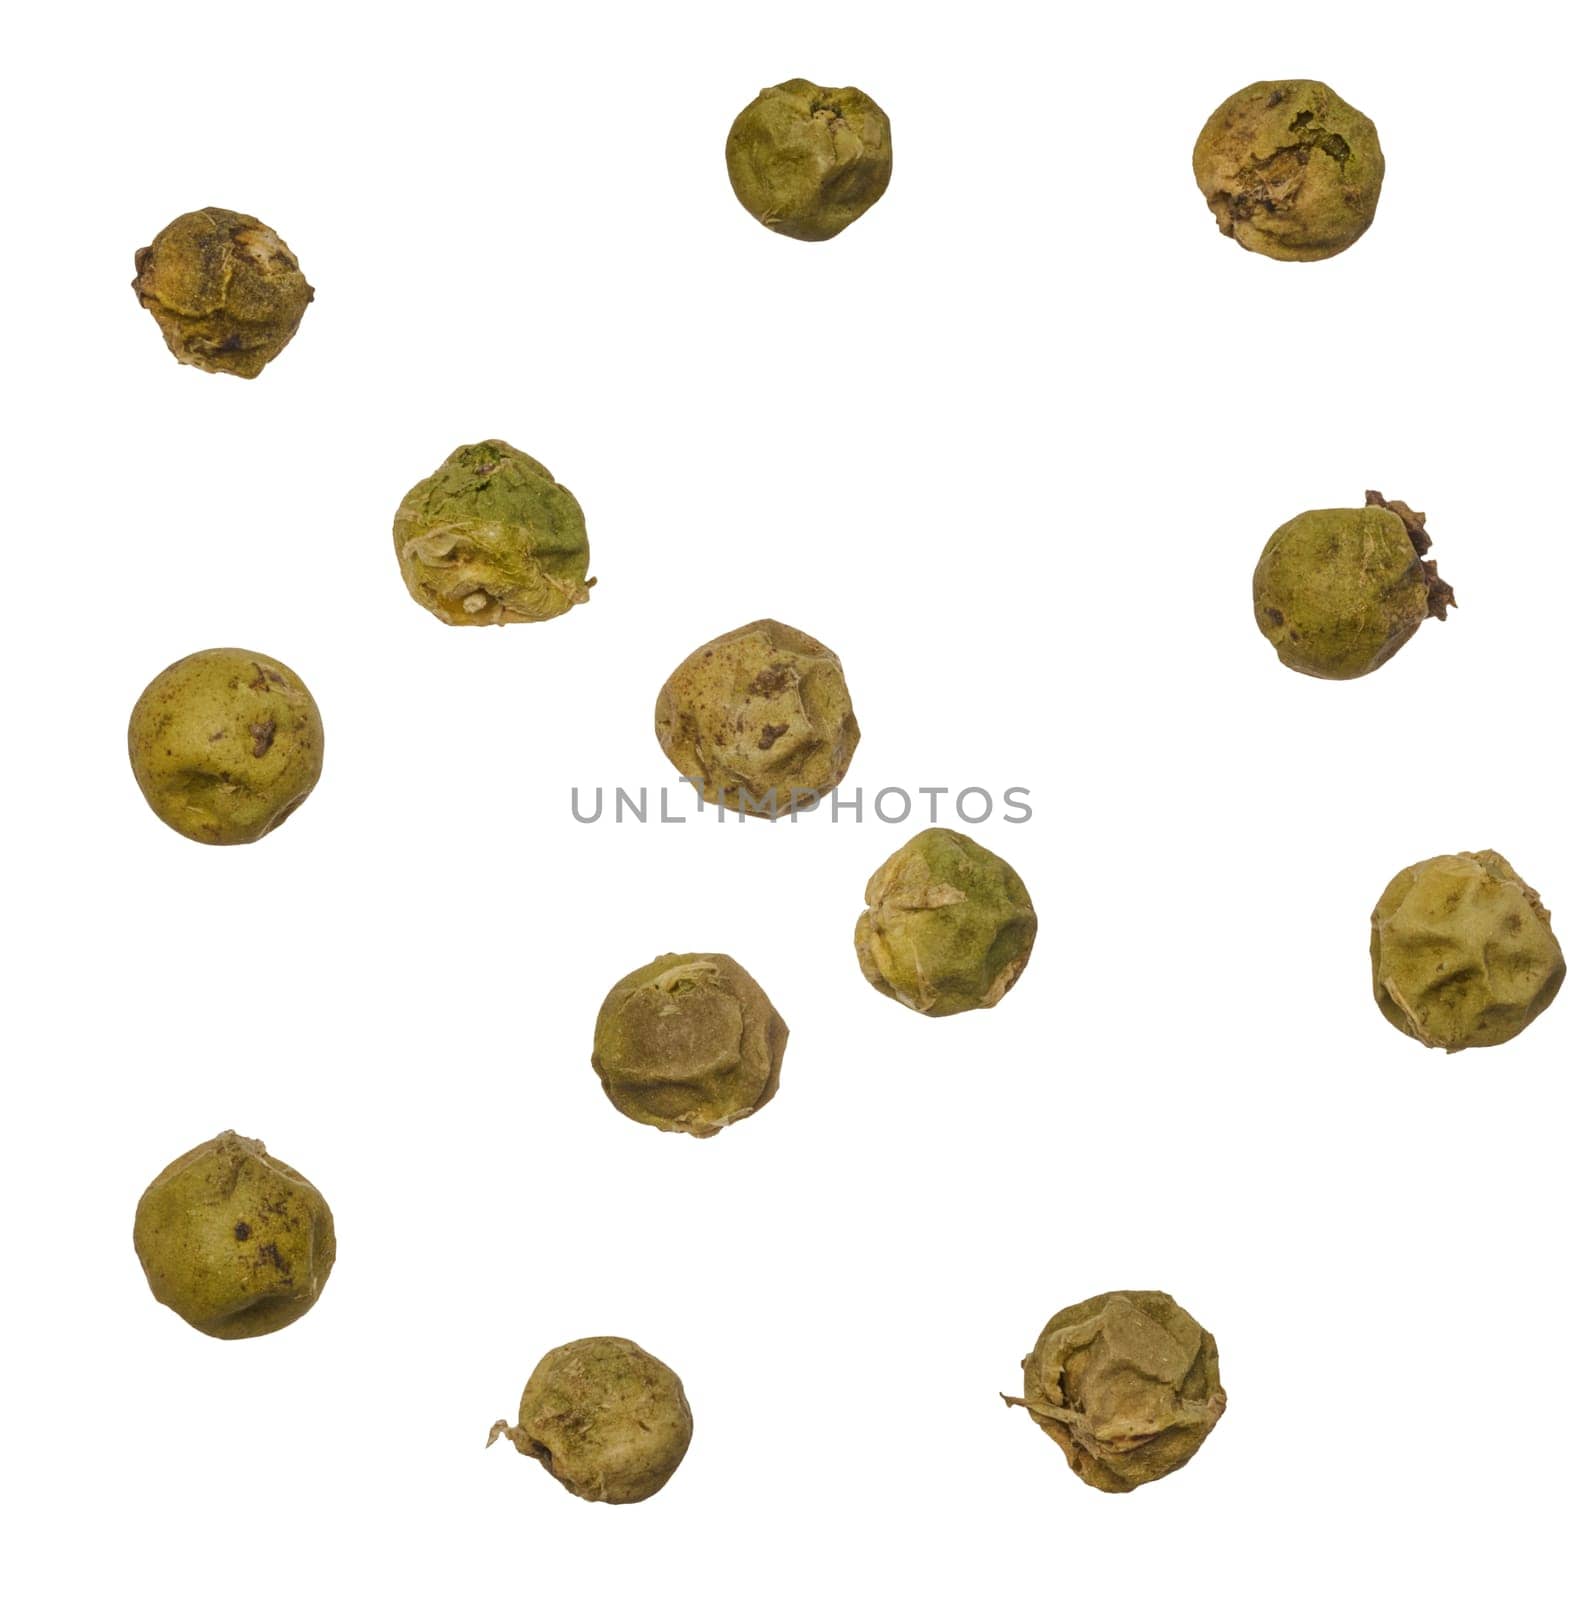 Dry round green peppercorns on isolated background, top view